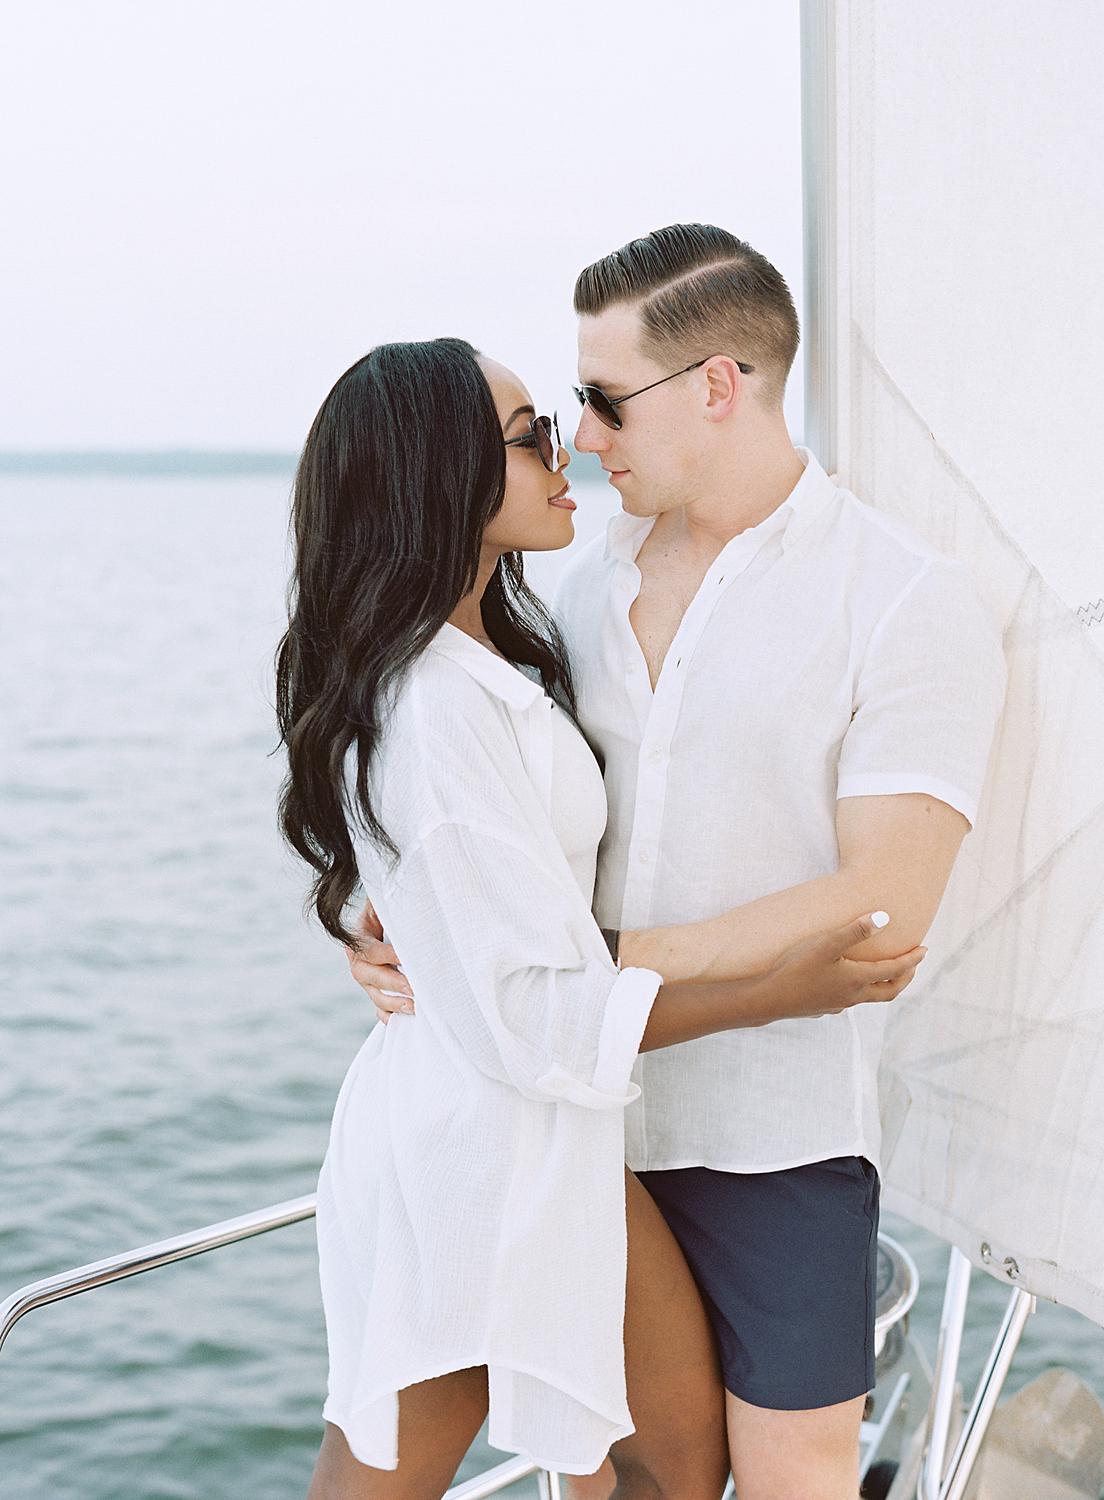 Bride and groom kissing at bow of ship during their engagement session in The Annapolis Harbor.